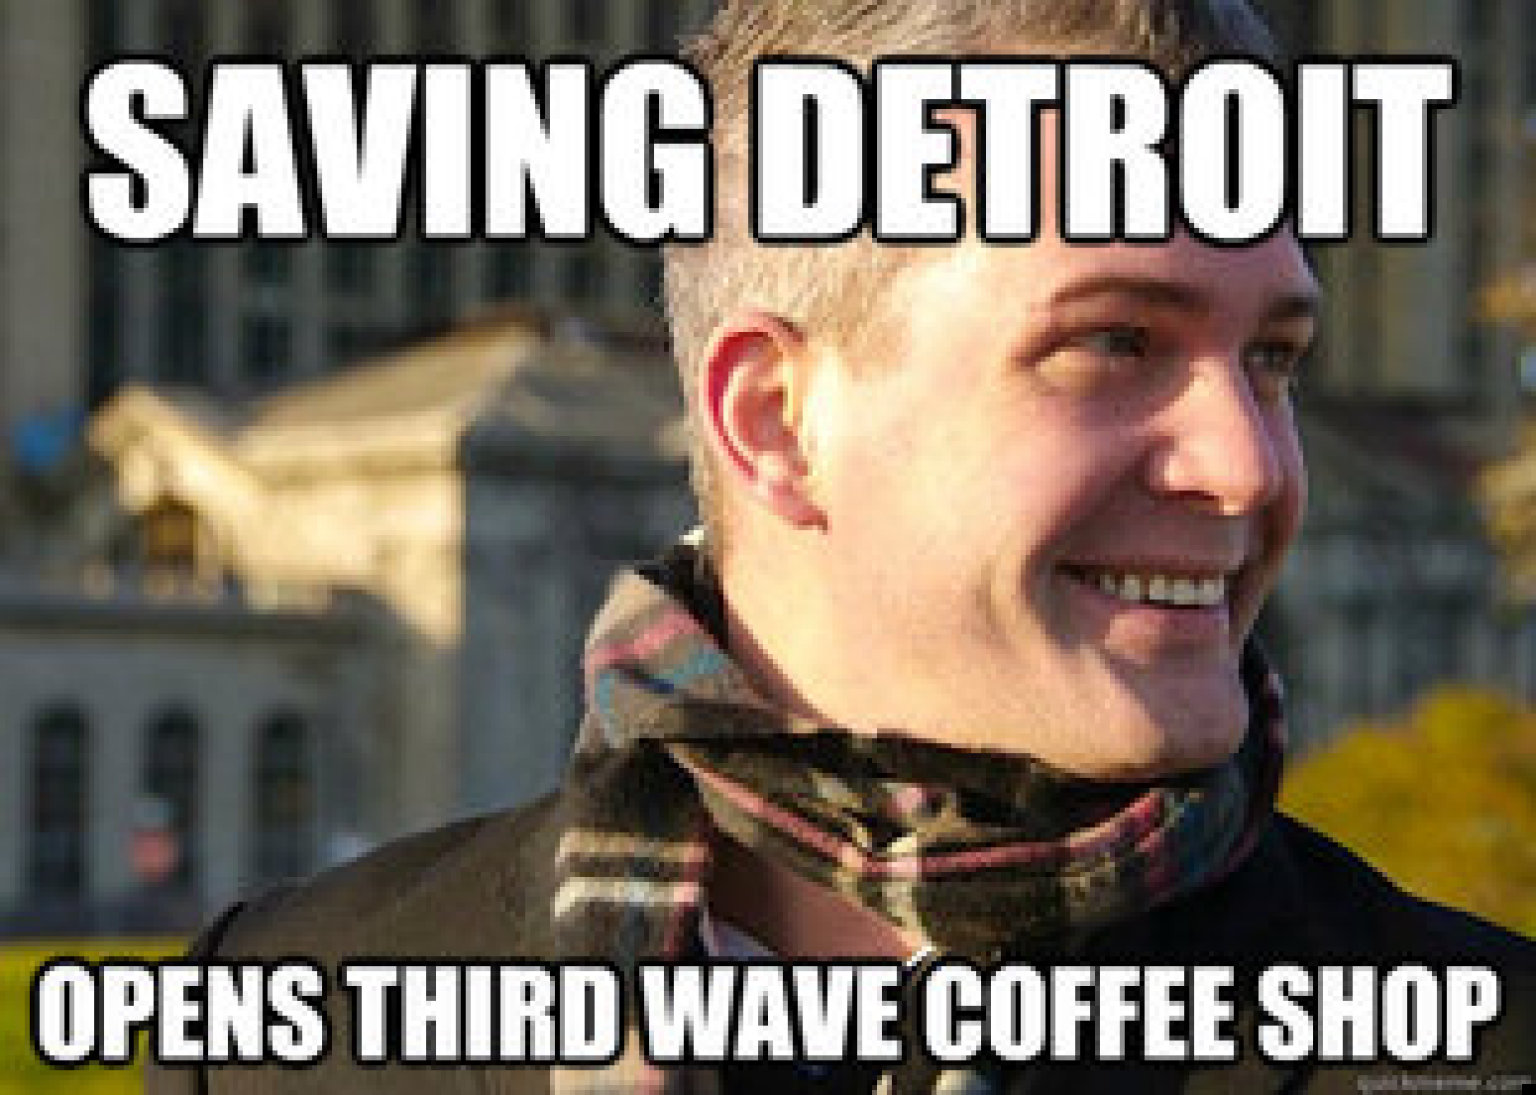 White Entrepreneurial Guy Detroit Meme Or A Viral Tale Of Two